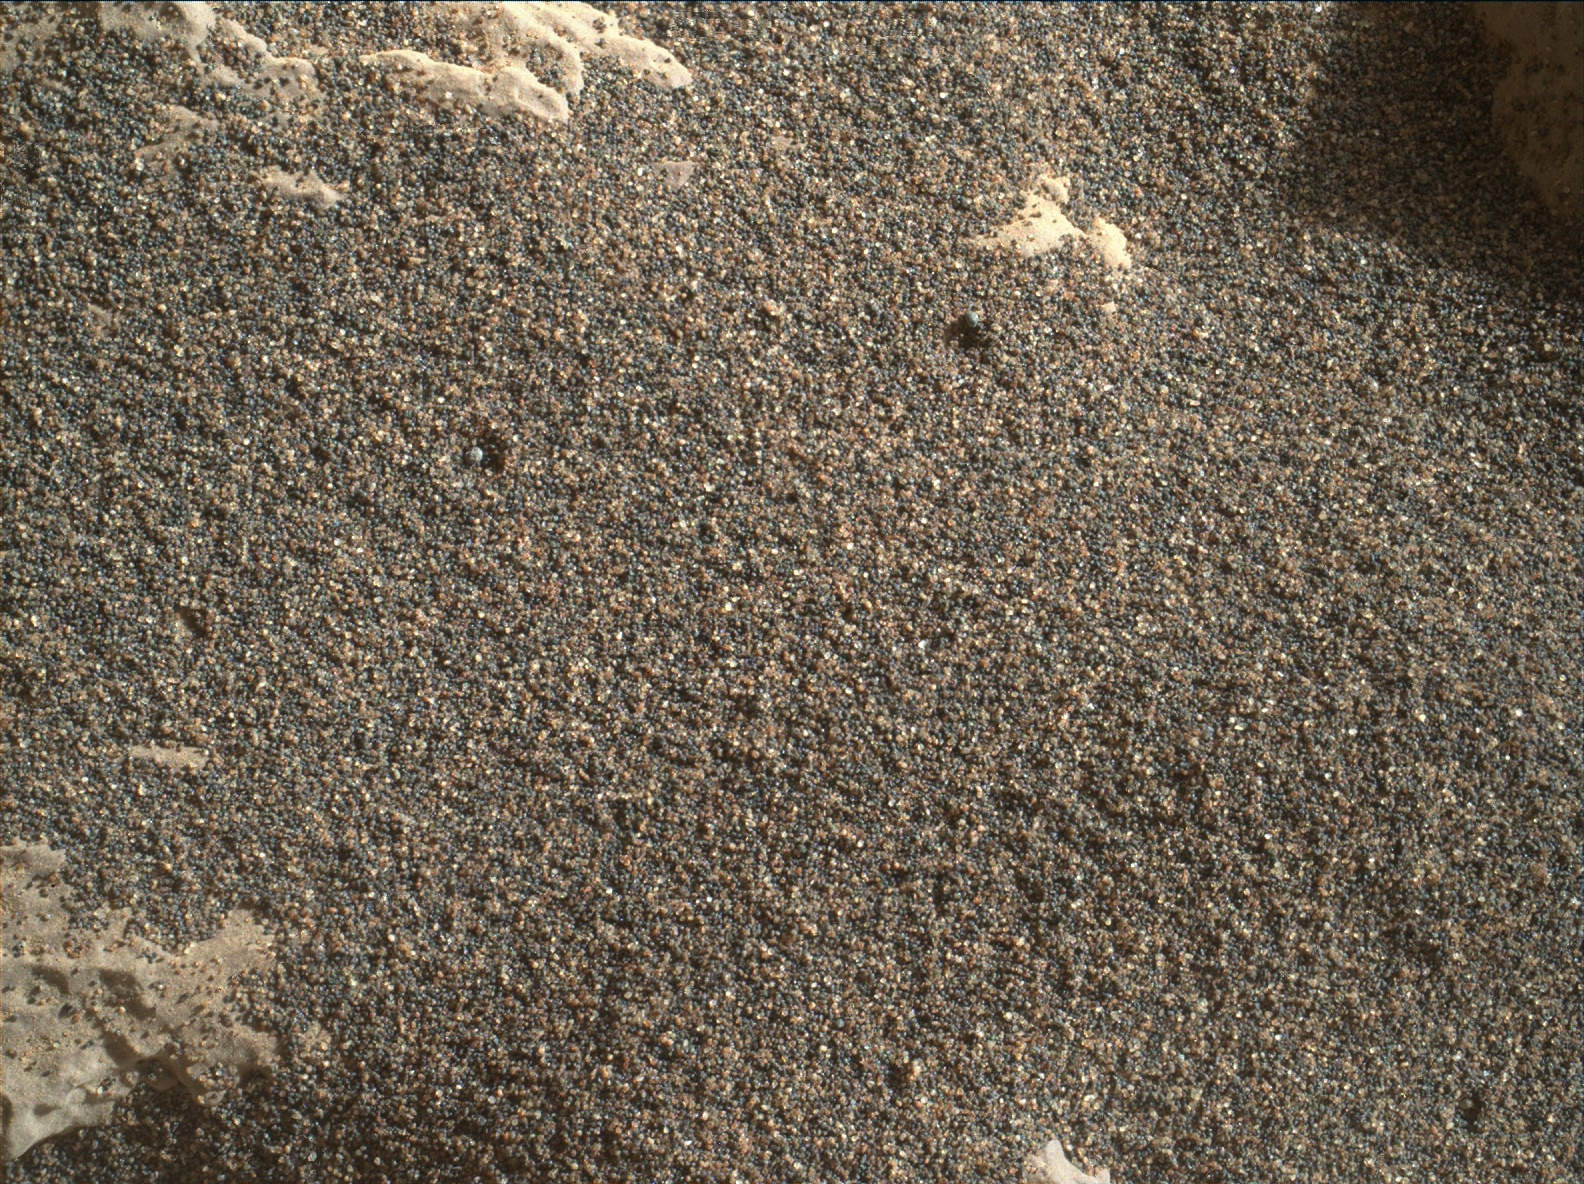 Nasa's Mars rover Curiosity acquired this image using its Mars Hand Lens Imager (MAHLI) on Sol 1253